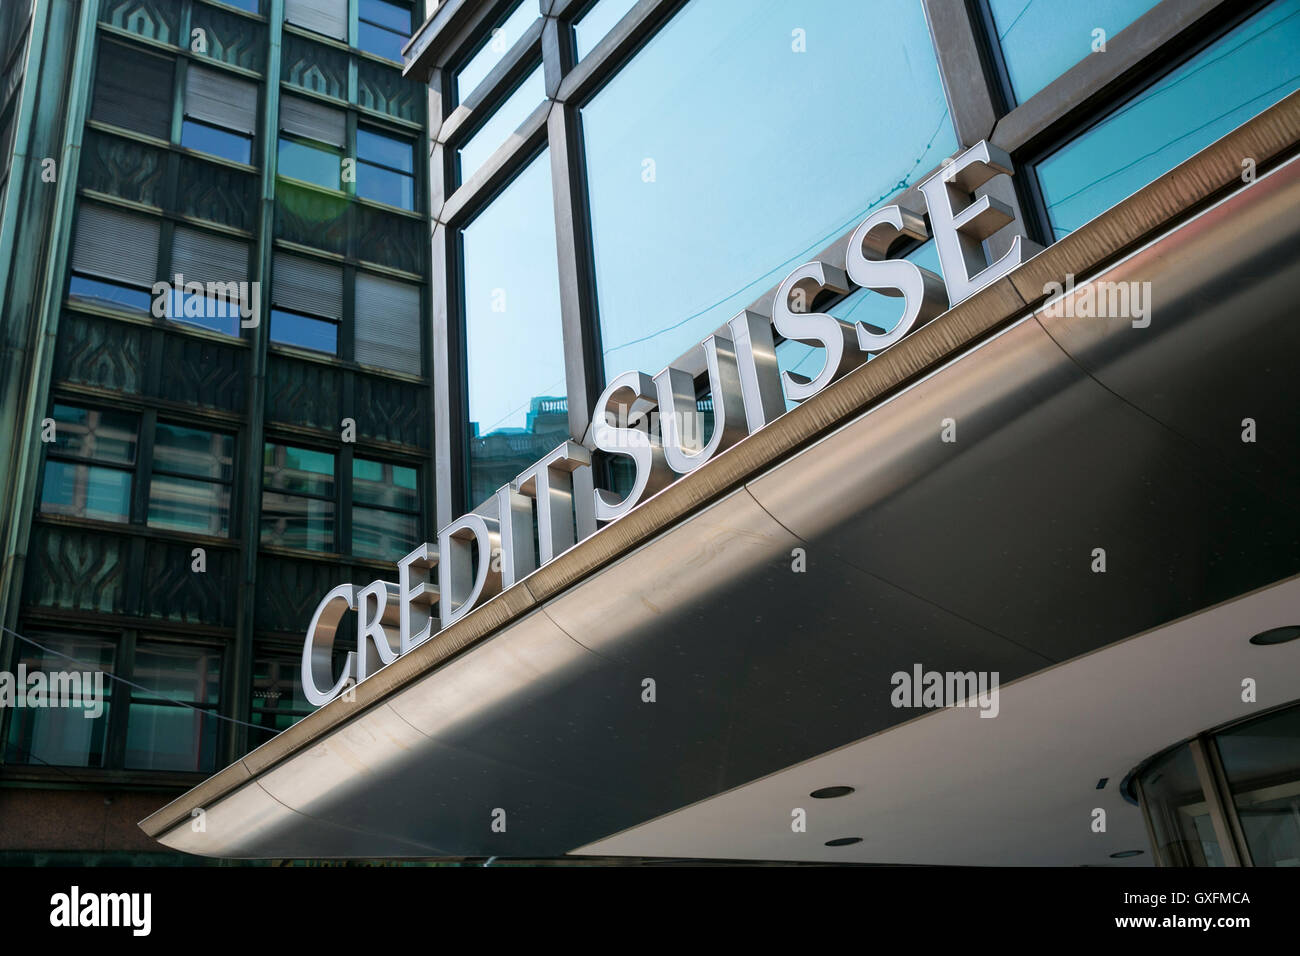 A logo sign outside of a facility occupied by the Credit Suisse Group in Milan, Italy on September 3, 2016. Stock Photo